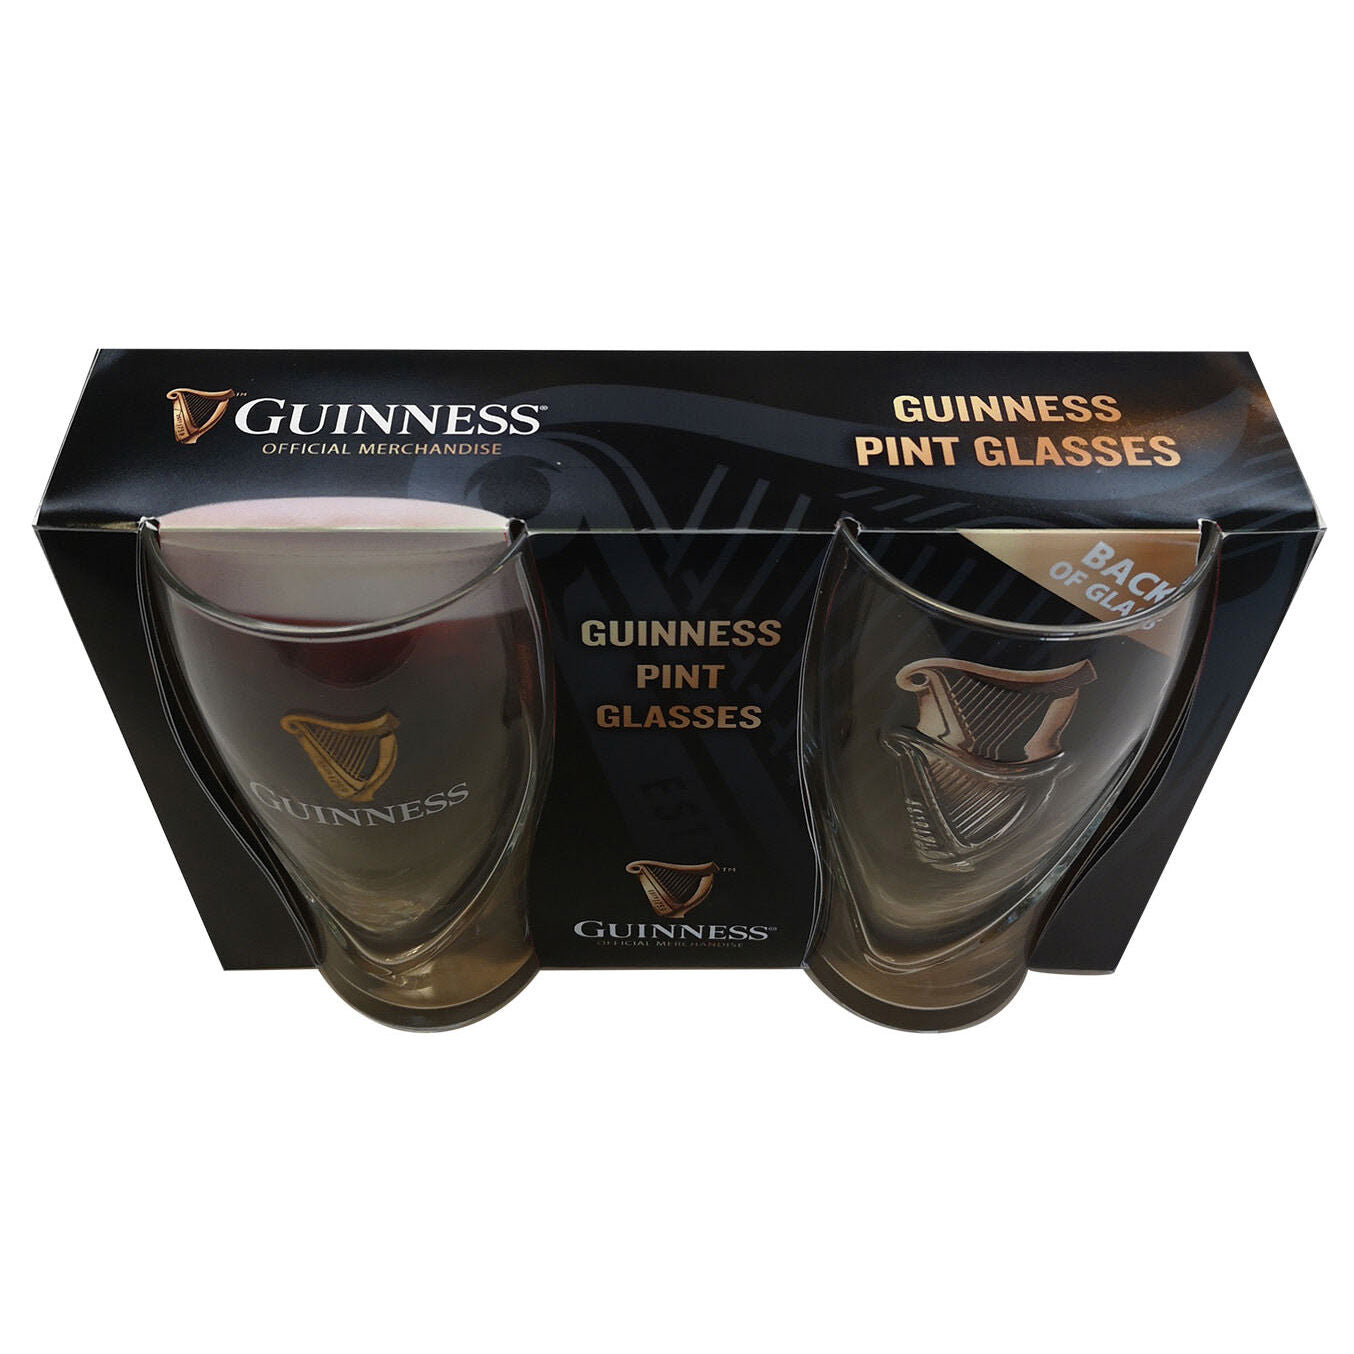 A set of Guinness UK pint glasses in packaging, perfect for any beer glass collection.